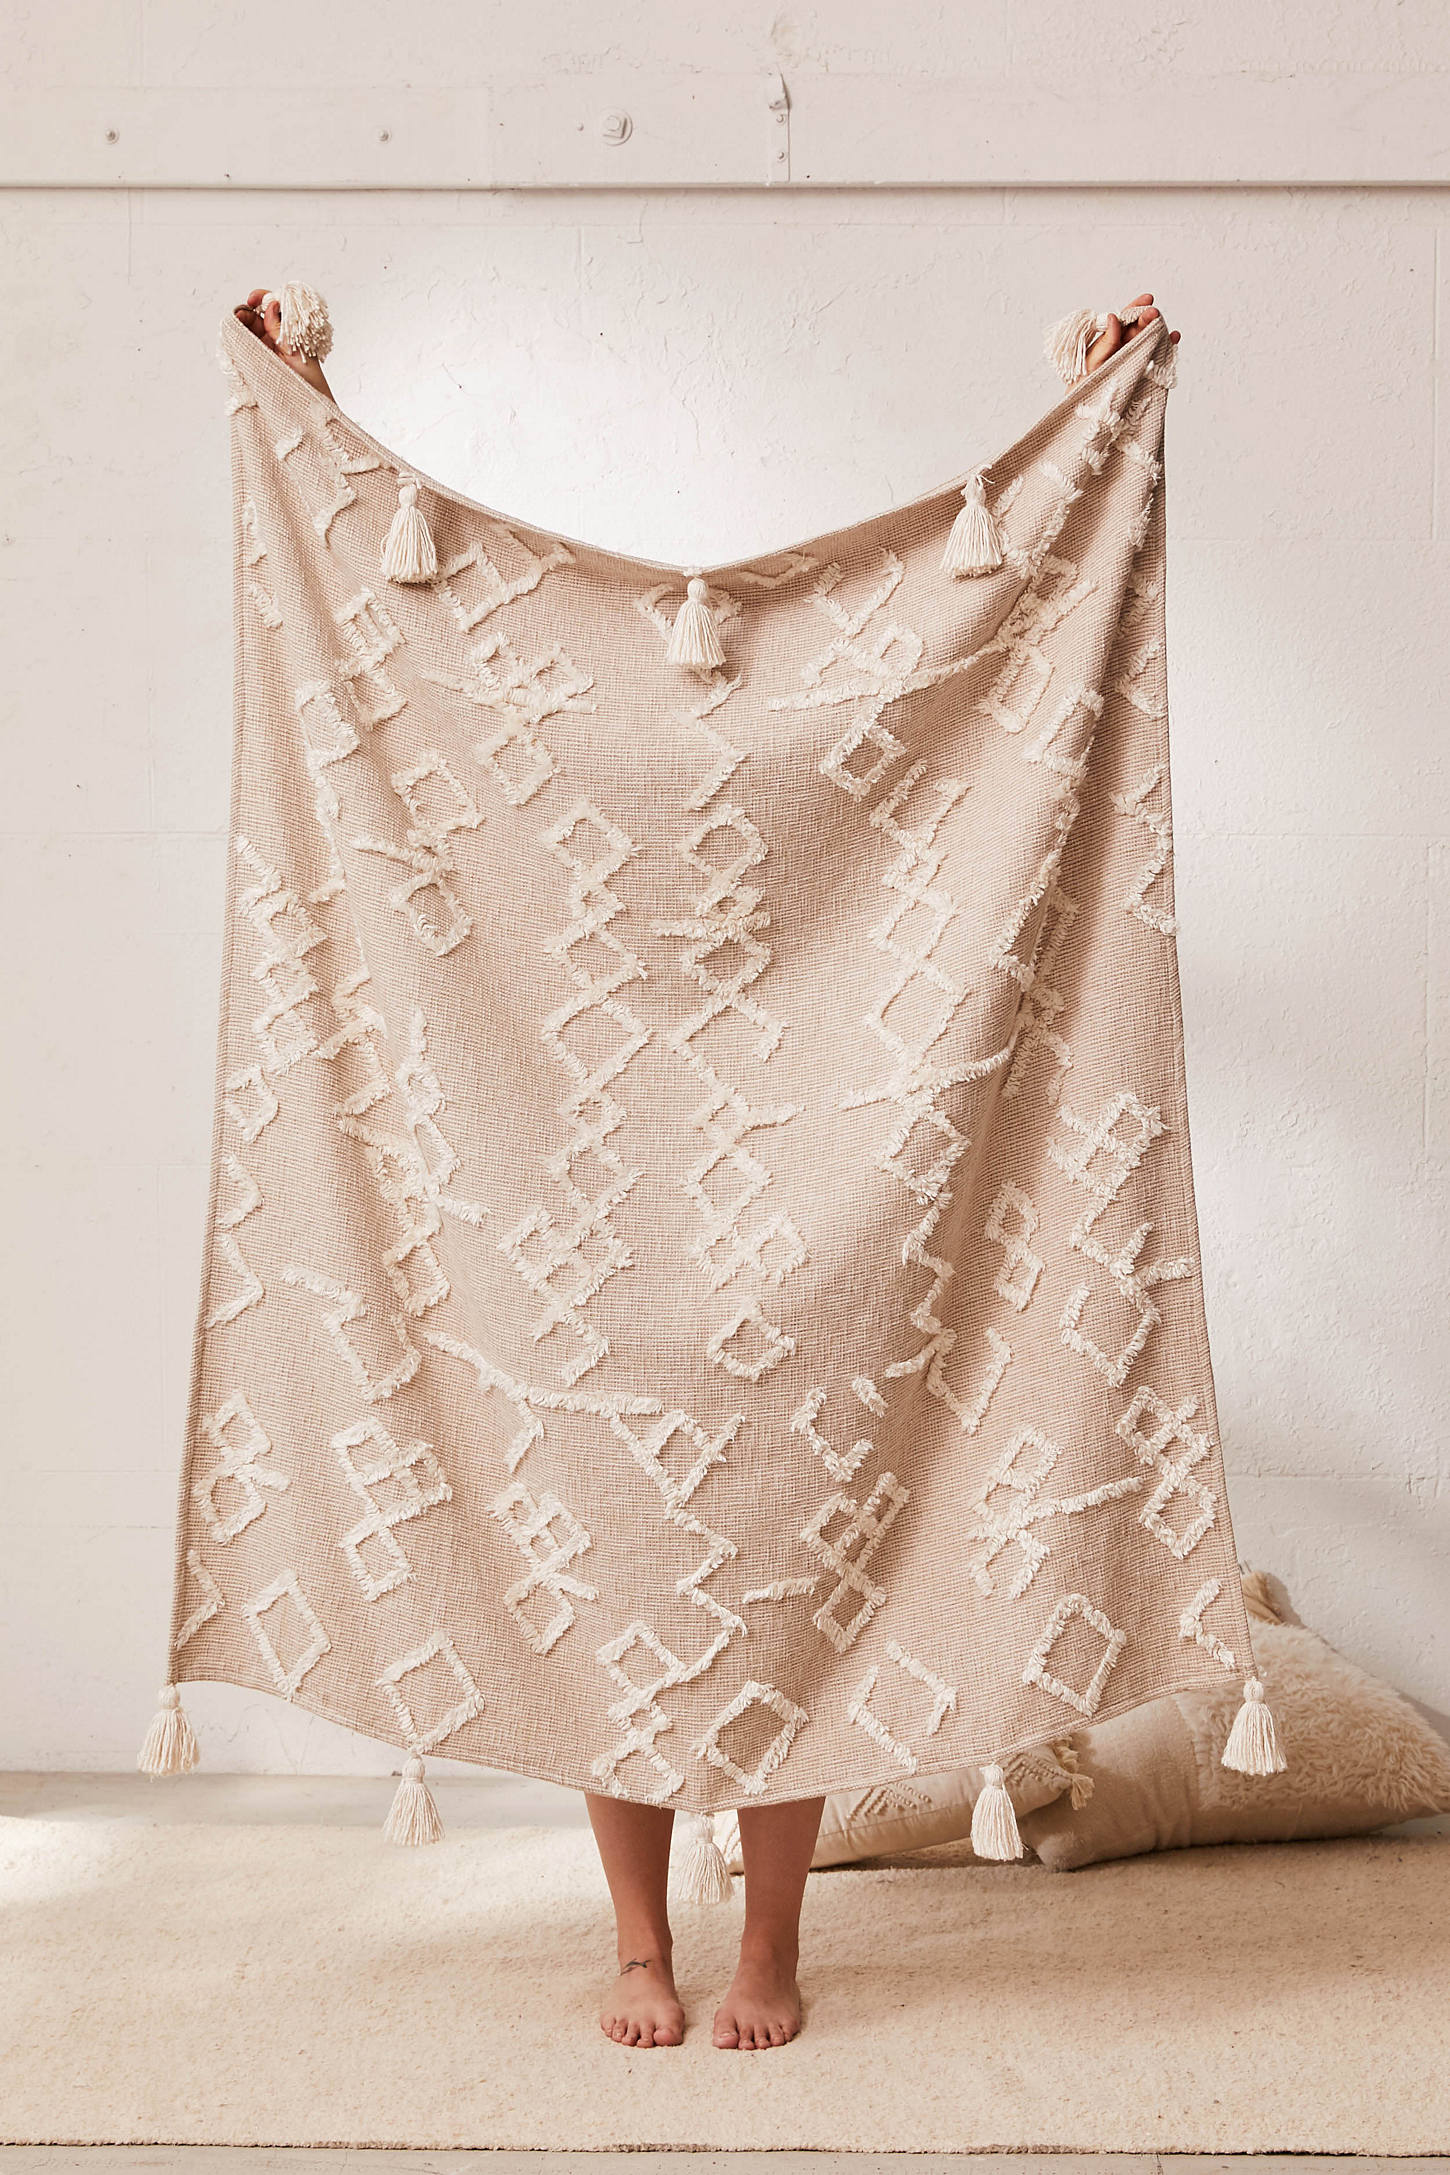 Shop Geo Tufted Tassel Throw Blanket from Urban Outfitters on Openhaus